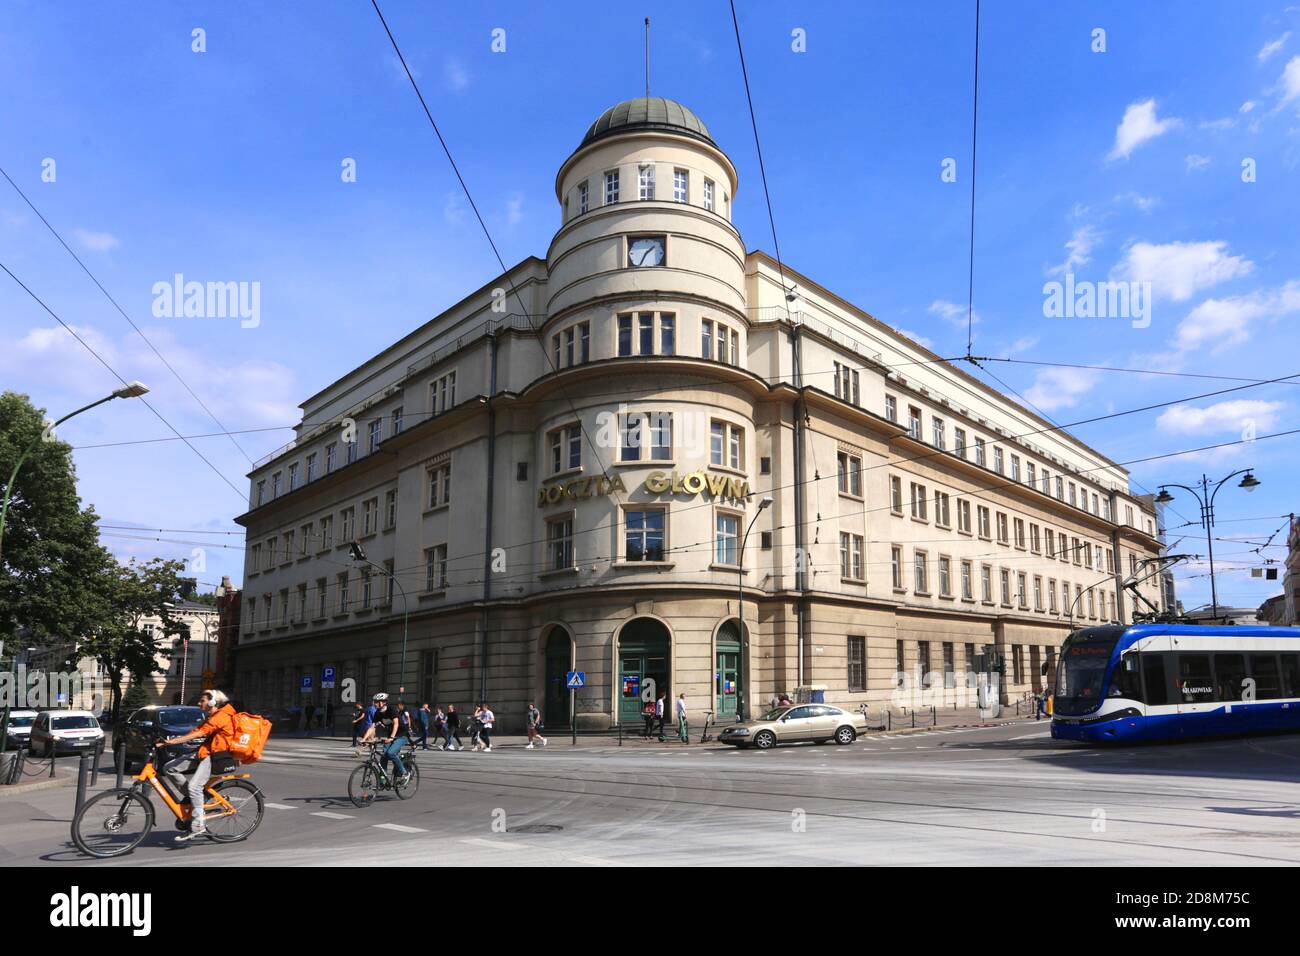 Cracow, Malopolska/Poland - 08.09.2020: The 19th century Main Post Office building on Wielopole street. Stock Photo